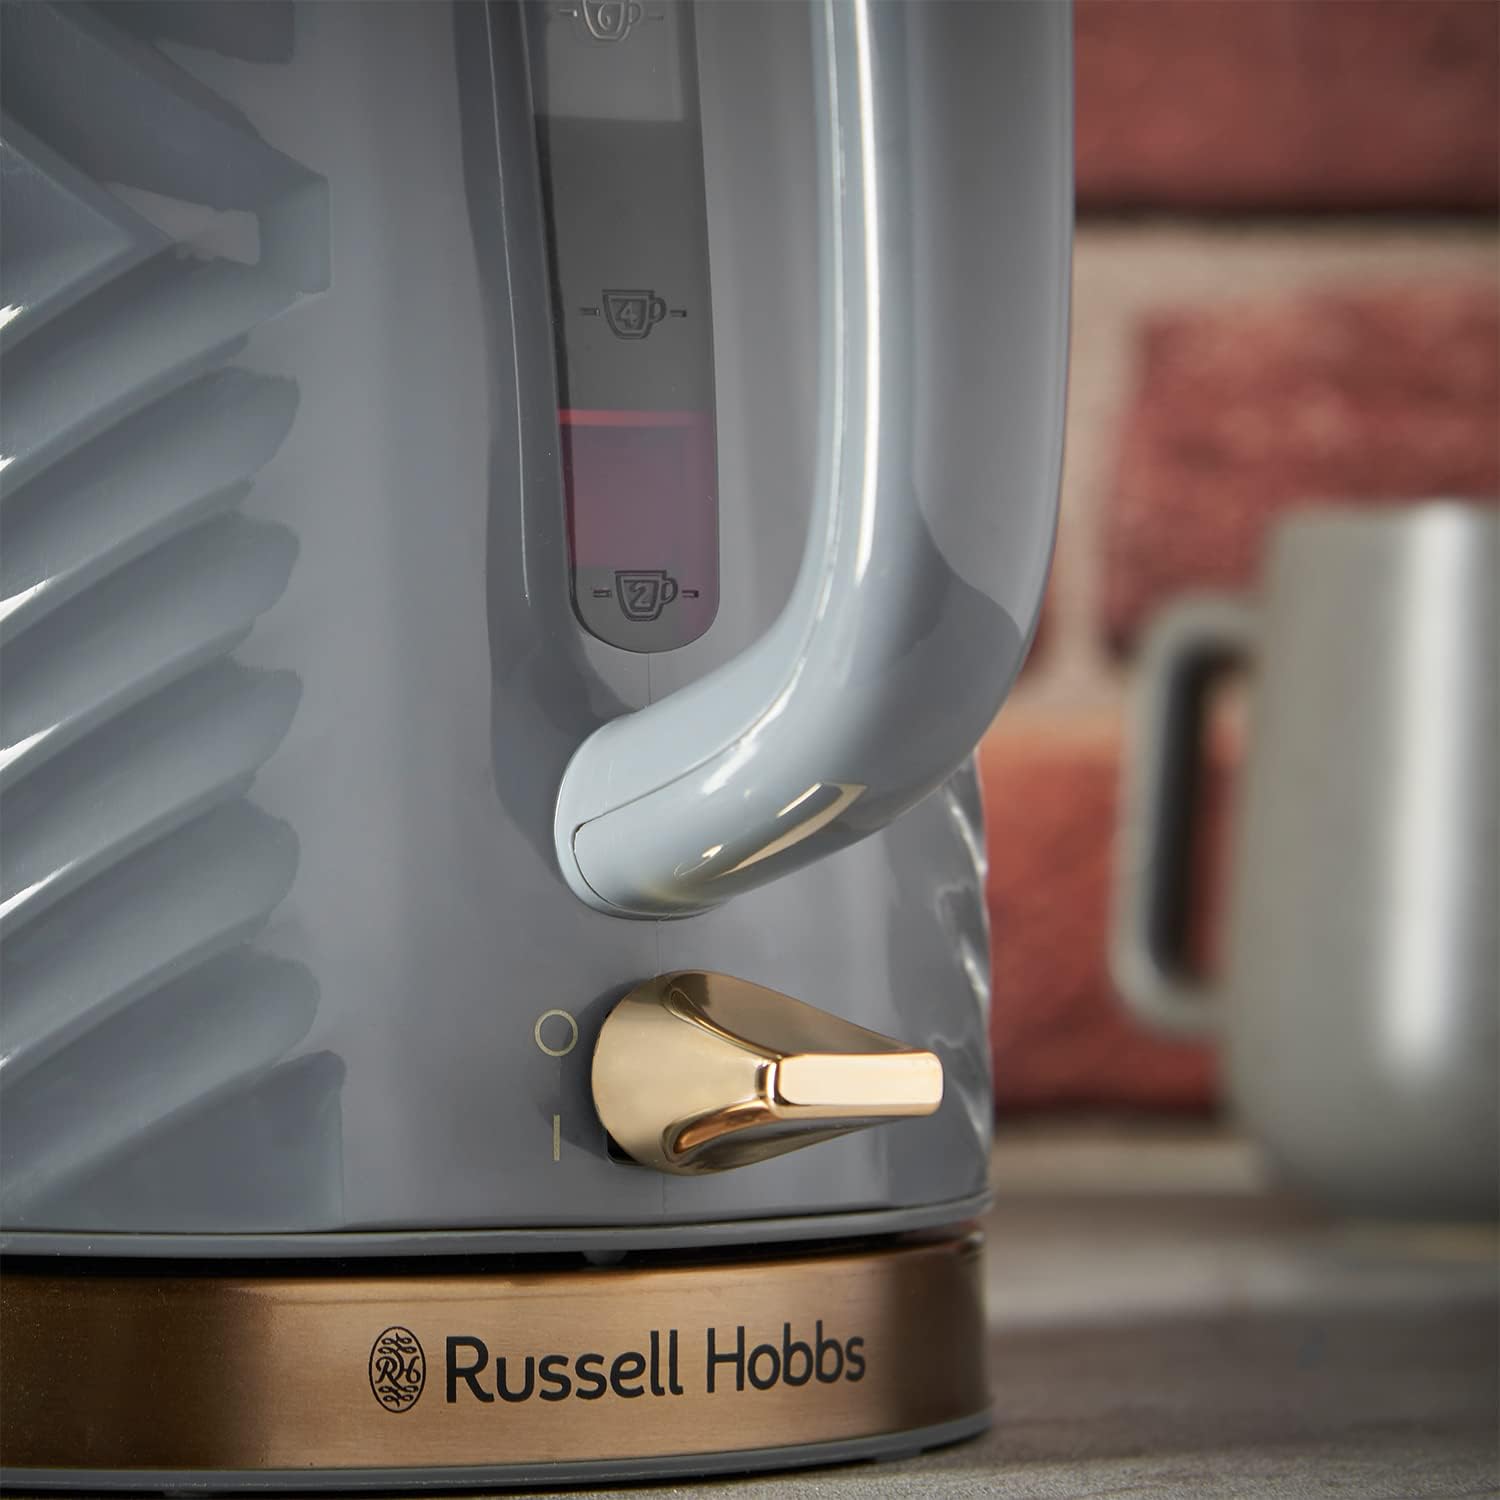 Russell Hobbs Groove Electric 1.7L Cordless Kettle (Fast Boil 3KW, Grey textured plastic with brushed gold accents, Removable washable anti - scale filter, Push to open lid, Perfect pour spout) 26382 - Amazing Gadgets Outlet